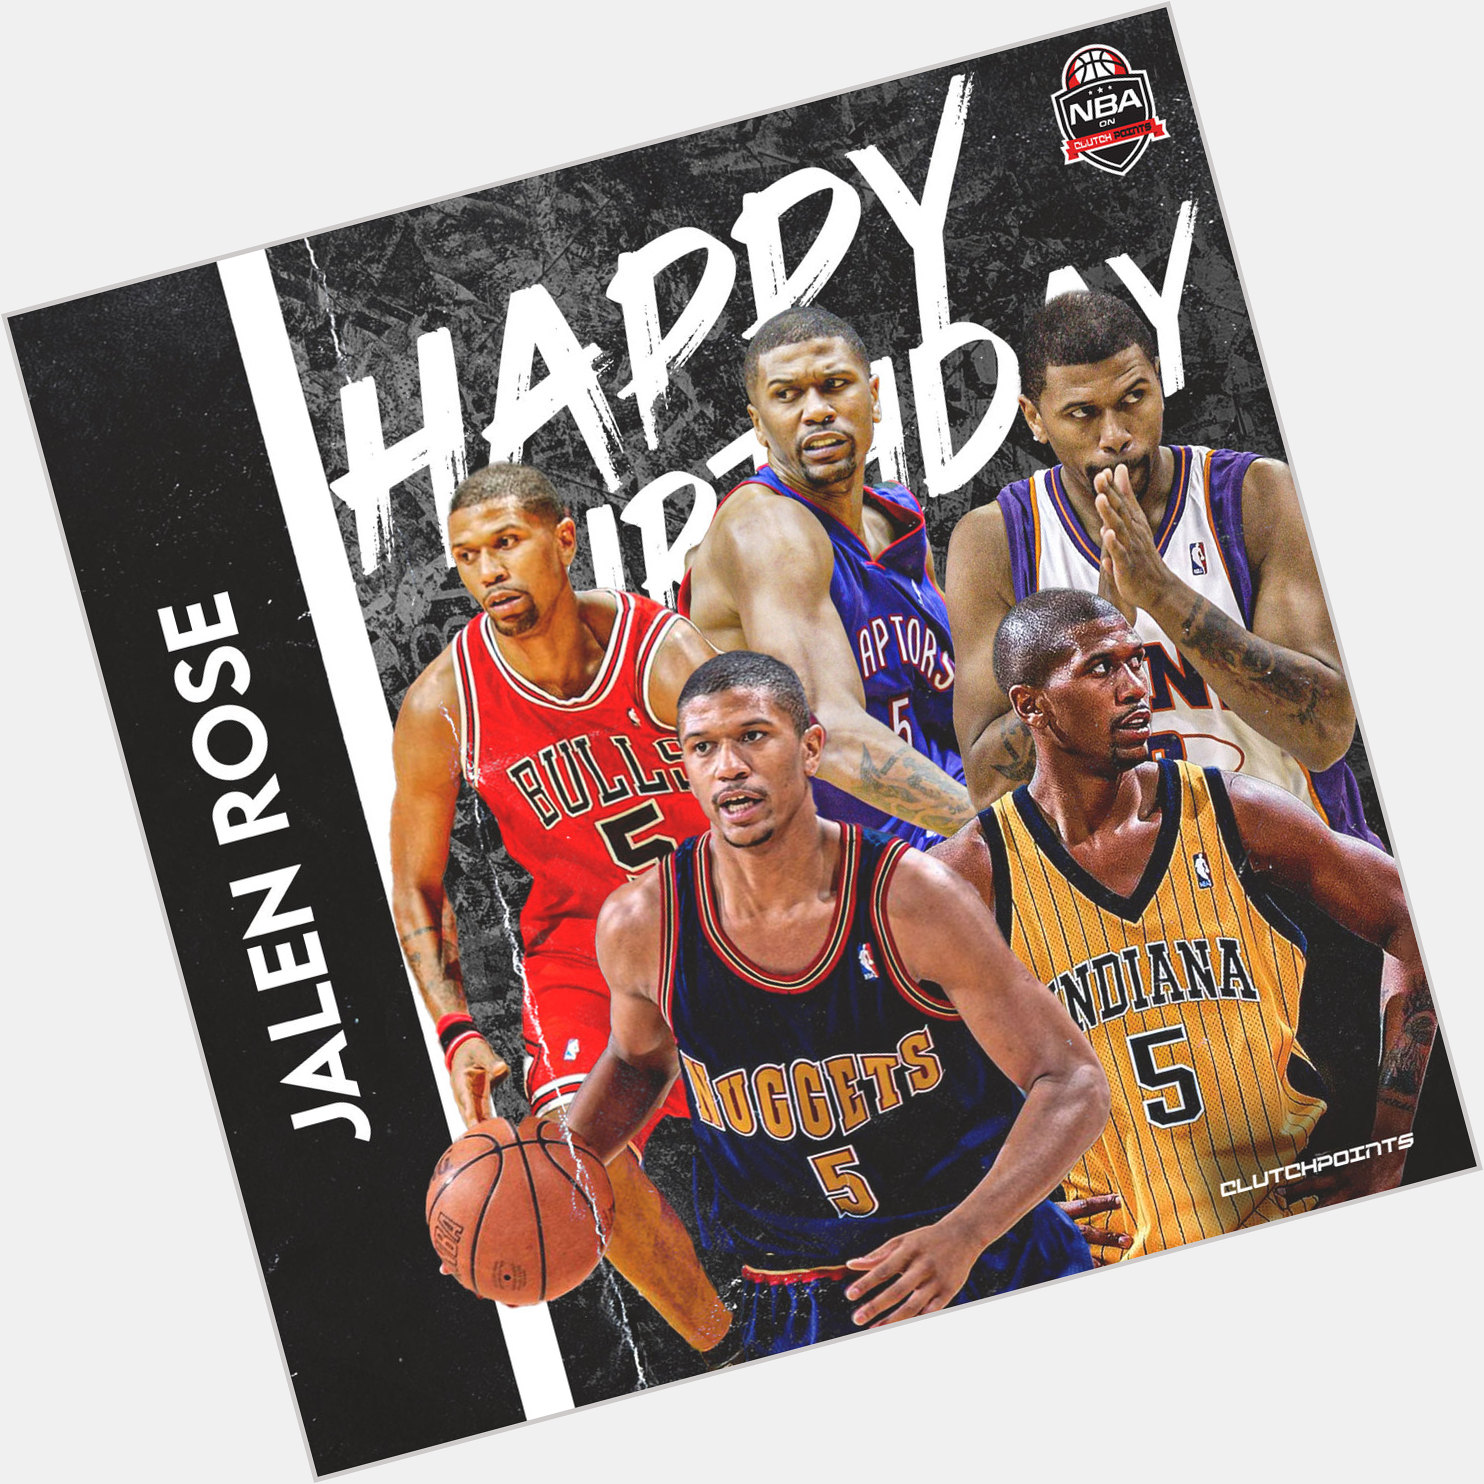 Let s all wish Jalen Rose a very happy 49th birthday  